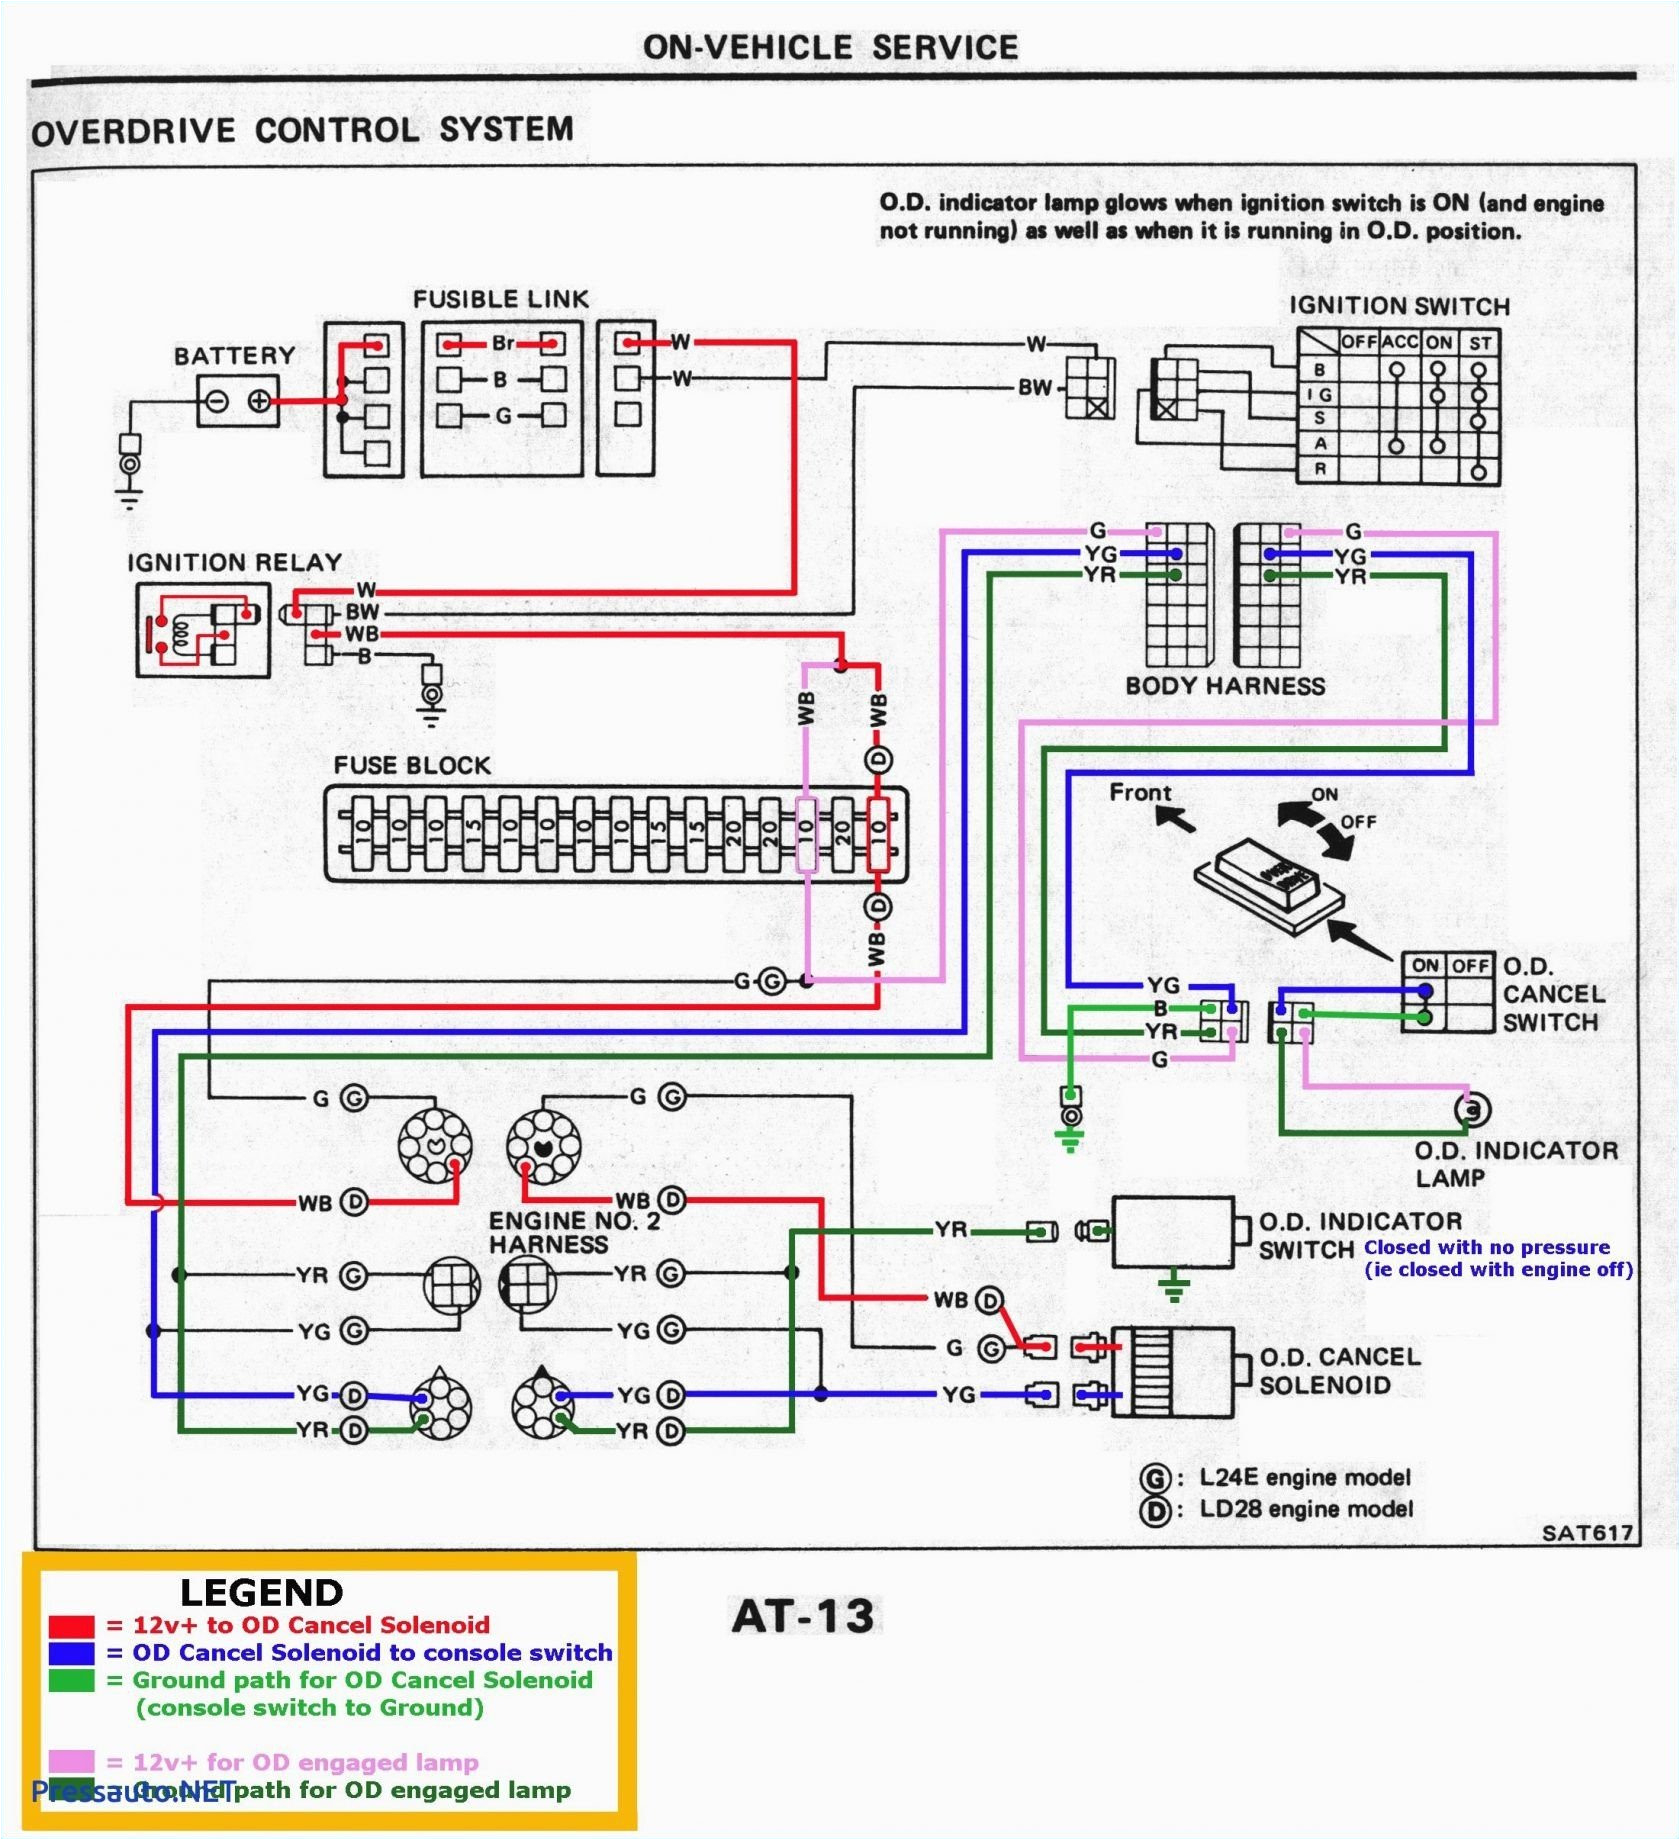 1994 psd to 1996 cab wiring harness swap electrical schematic 1994 psd to 1996 cab wiring harness swap